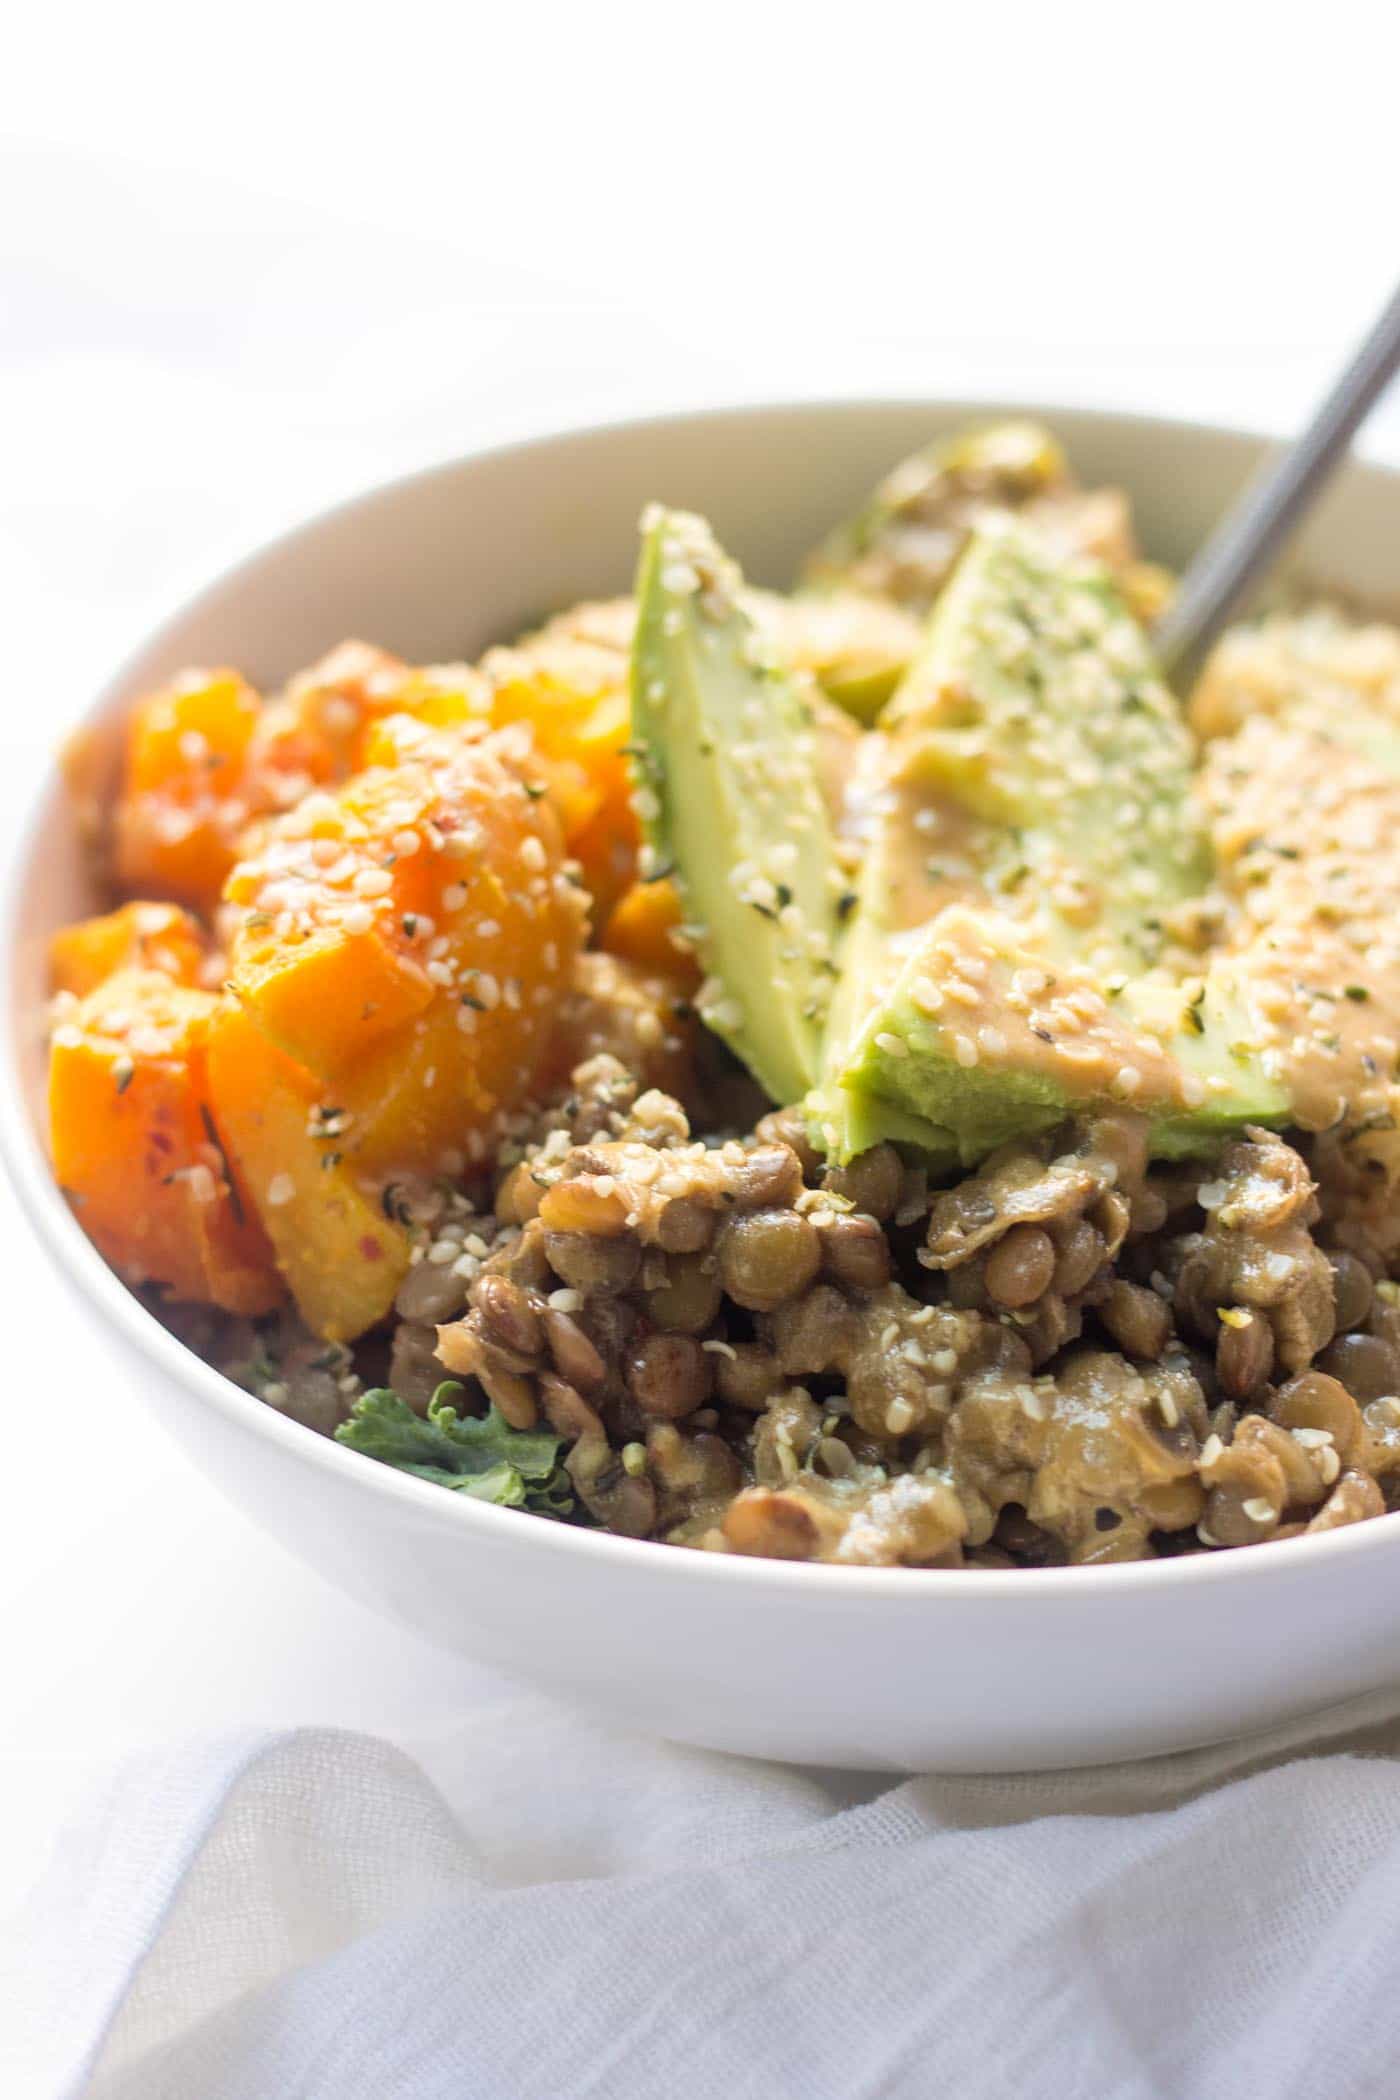 Cozy Quinoa Buddha Bowls with kale, lentils, roasted veggies and avocado -- they make the simplest plant-based meal ever!